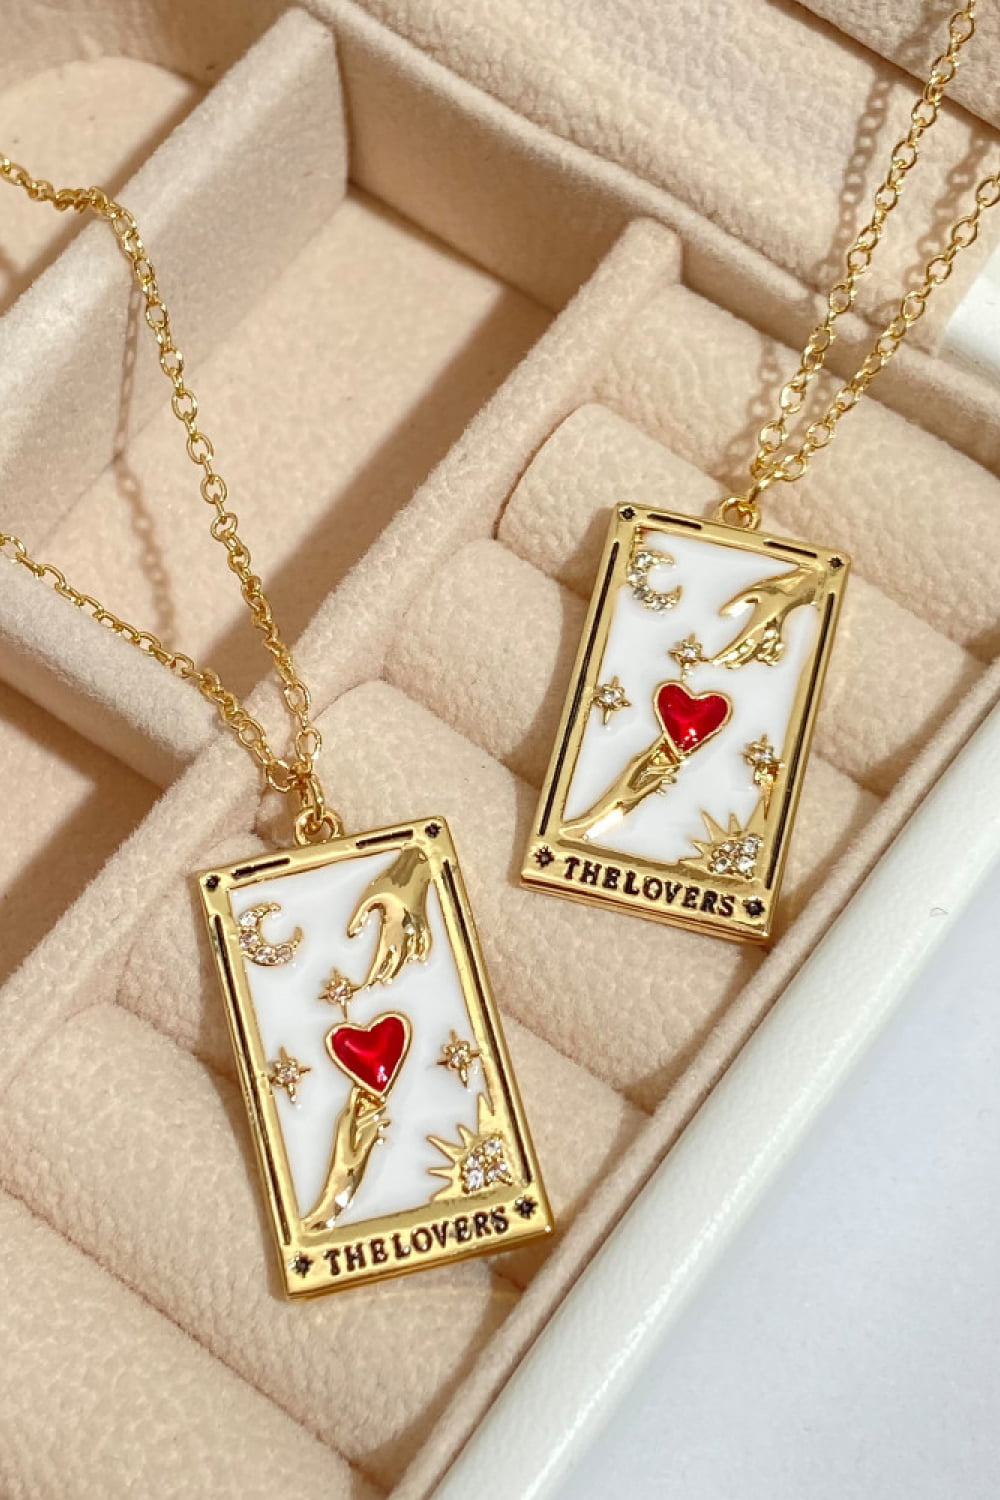 Trendsi Cupid Beauty Supplies Women Necklace Tarot Card Pendant Stainless Steel Necklace